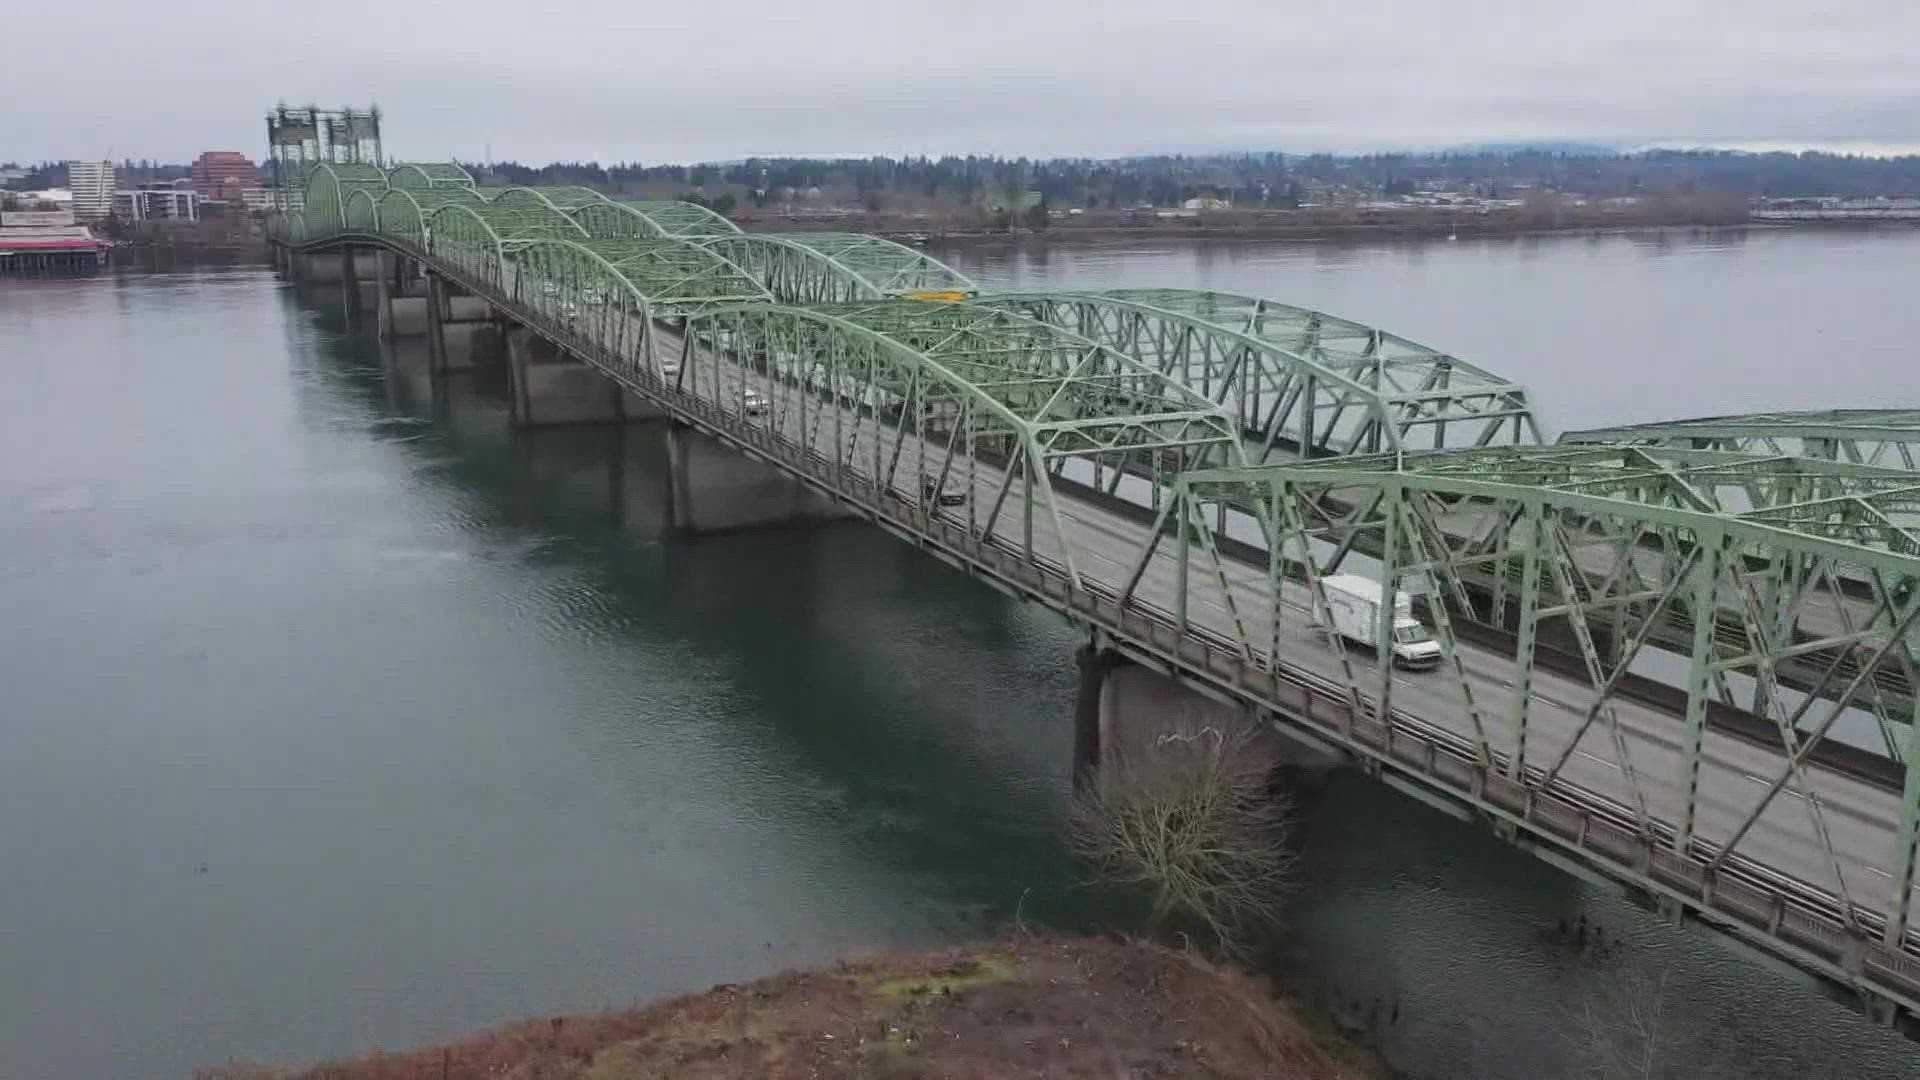 Democratic state lawmakers introduced a $16 billion proposal that invests in transportation improvements in Washington over the next 16 years.